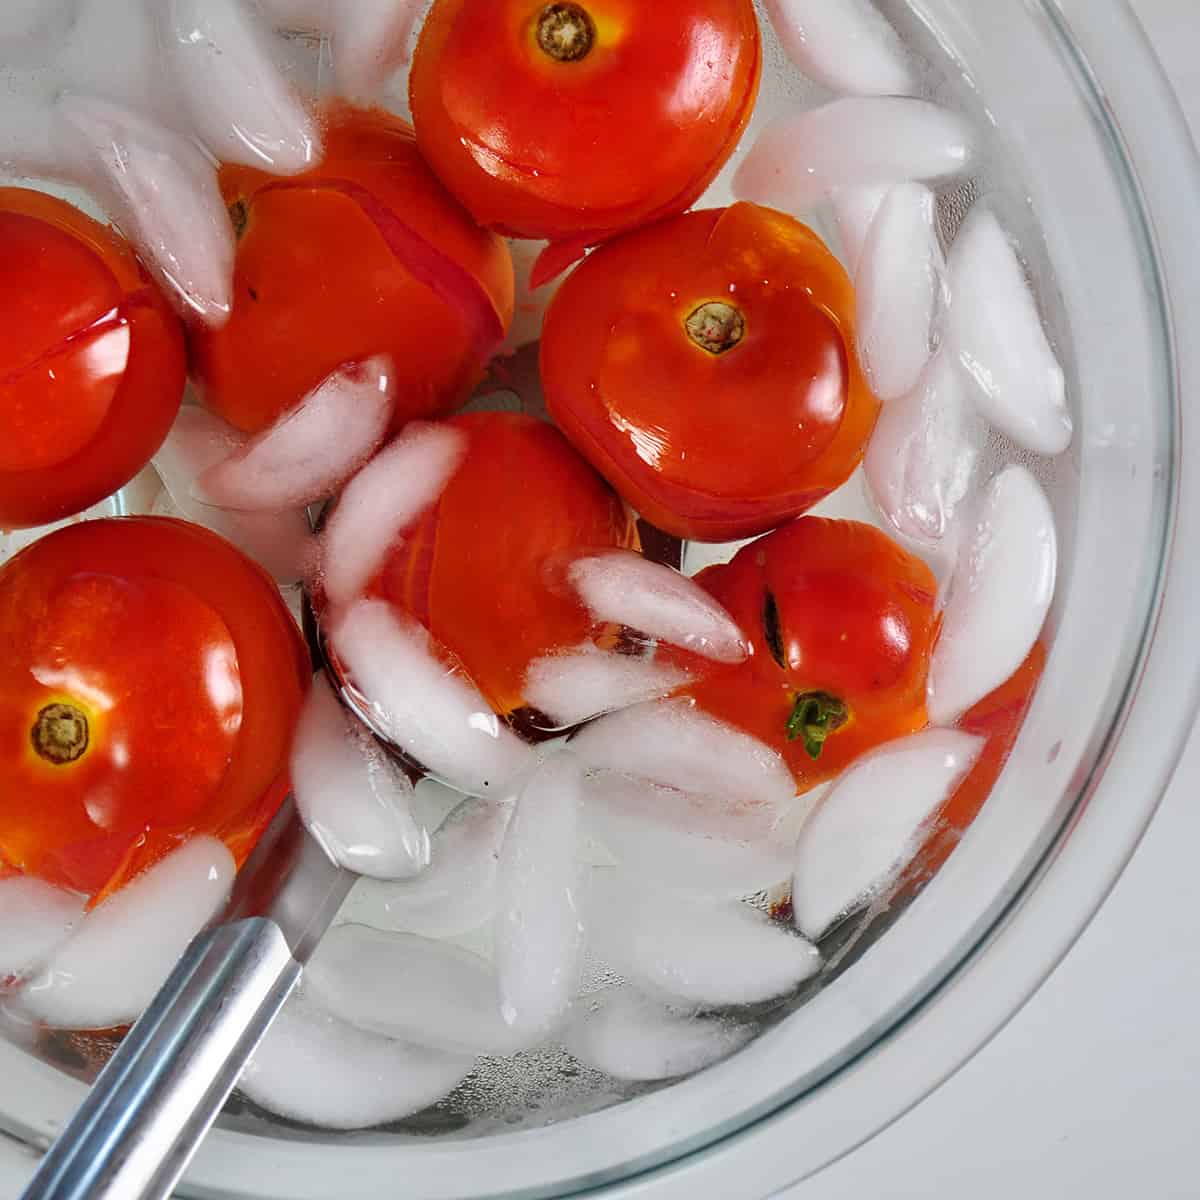 A large glass bow filled with water, ice, and tomatoes whose skin is peeling away.